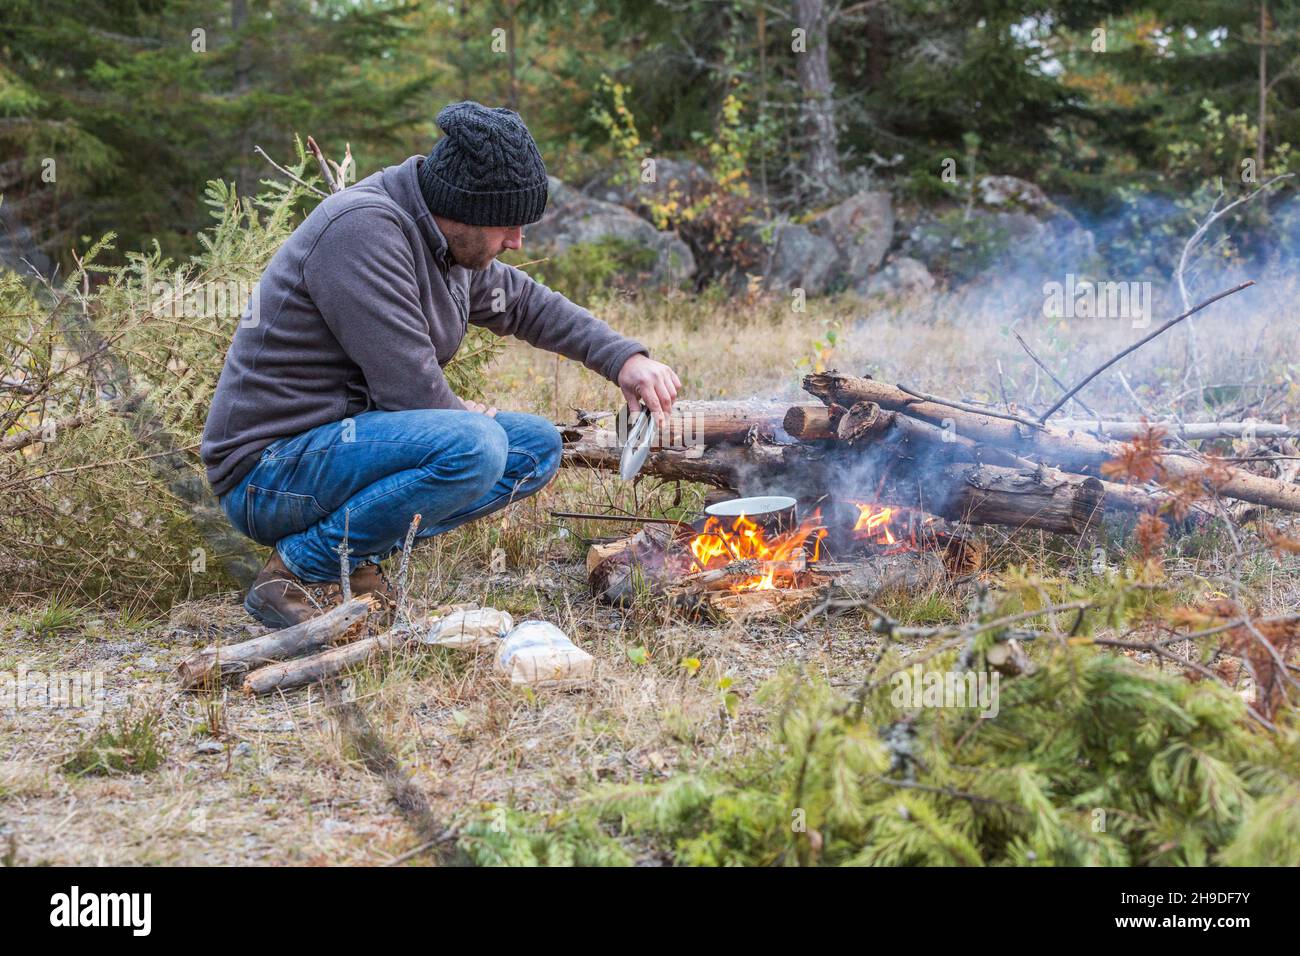 An adventurous man dressed in warm clothing and woolen hat cooks food on a smoking wood-fired campfire with lots of ready firewood to make a fire Stock Photo